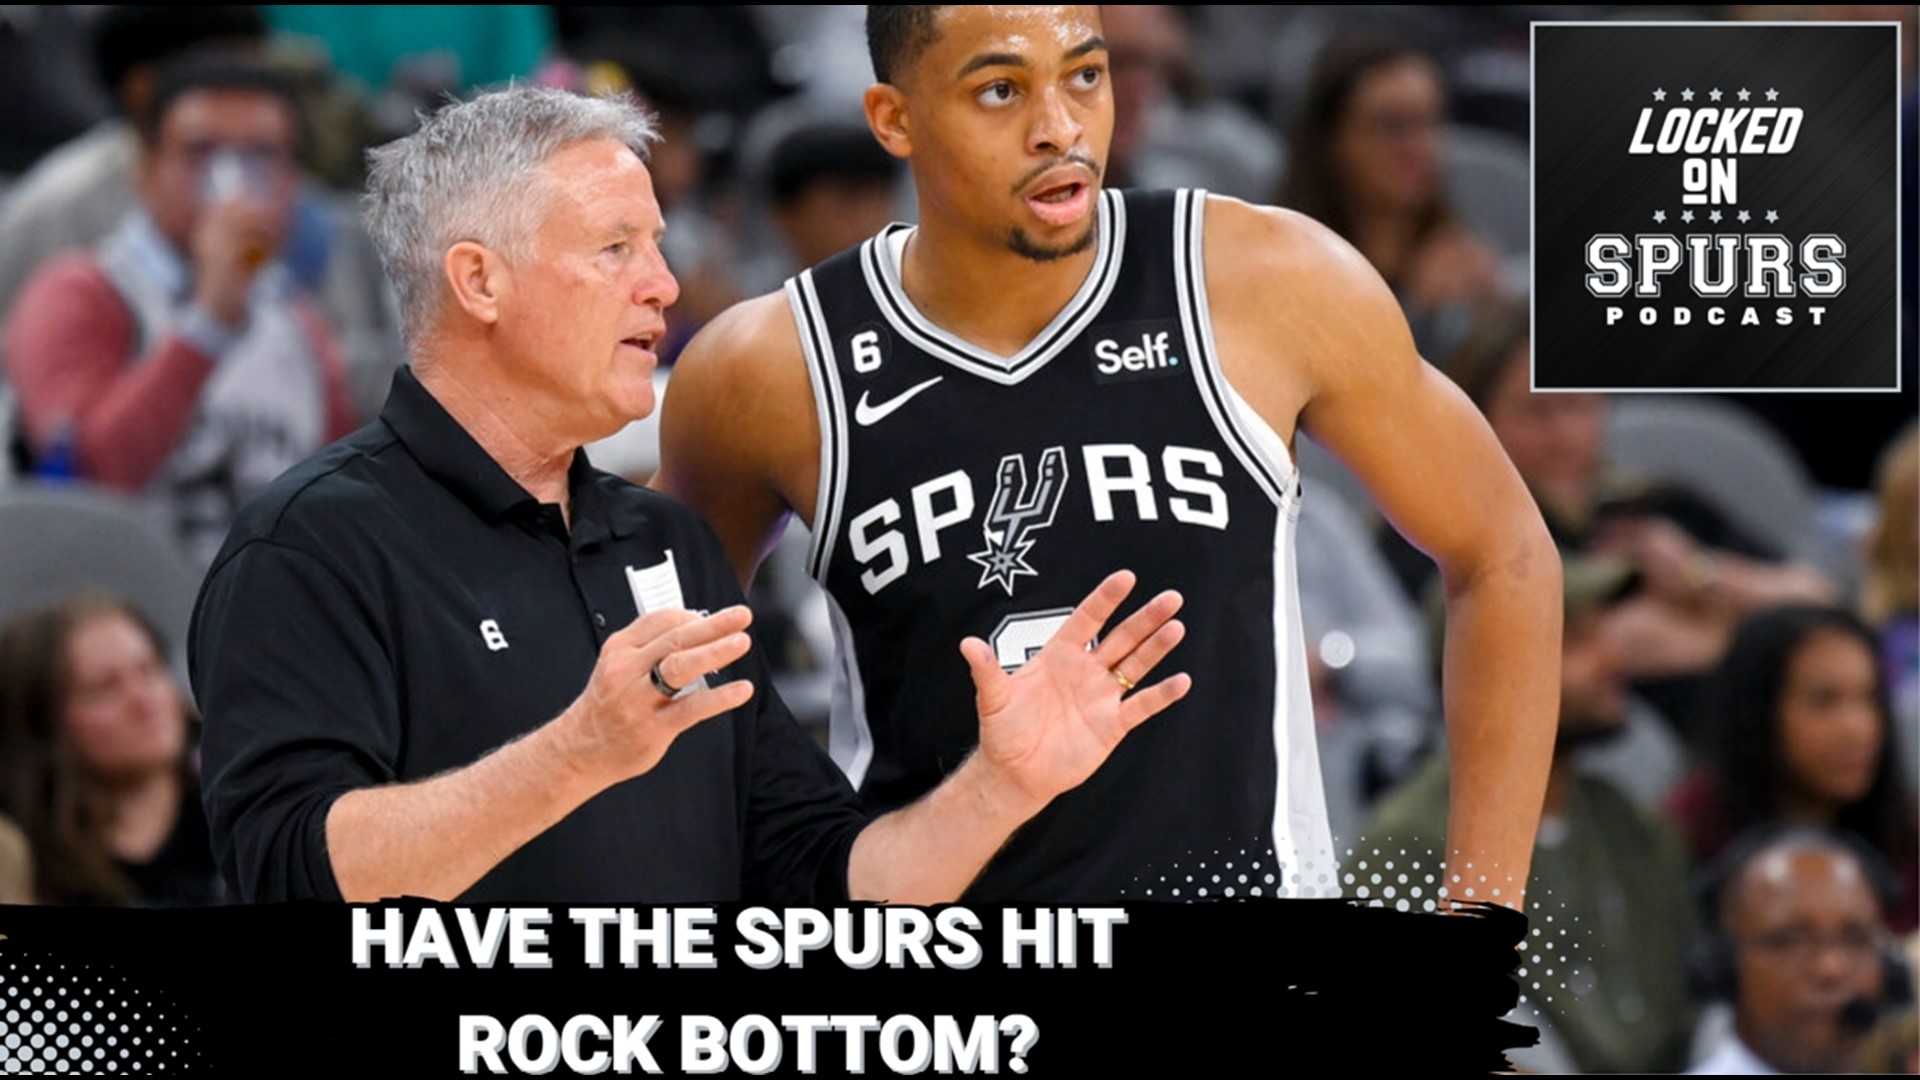 The Spurs are on an 11-game losing skid. How much worse can it get?